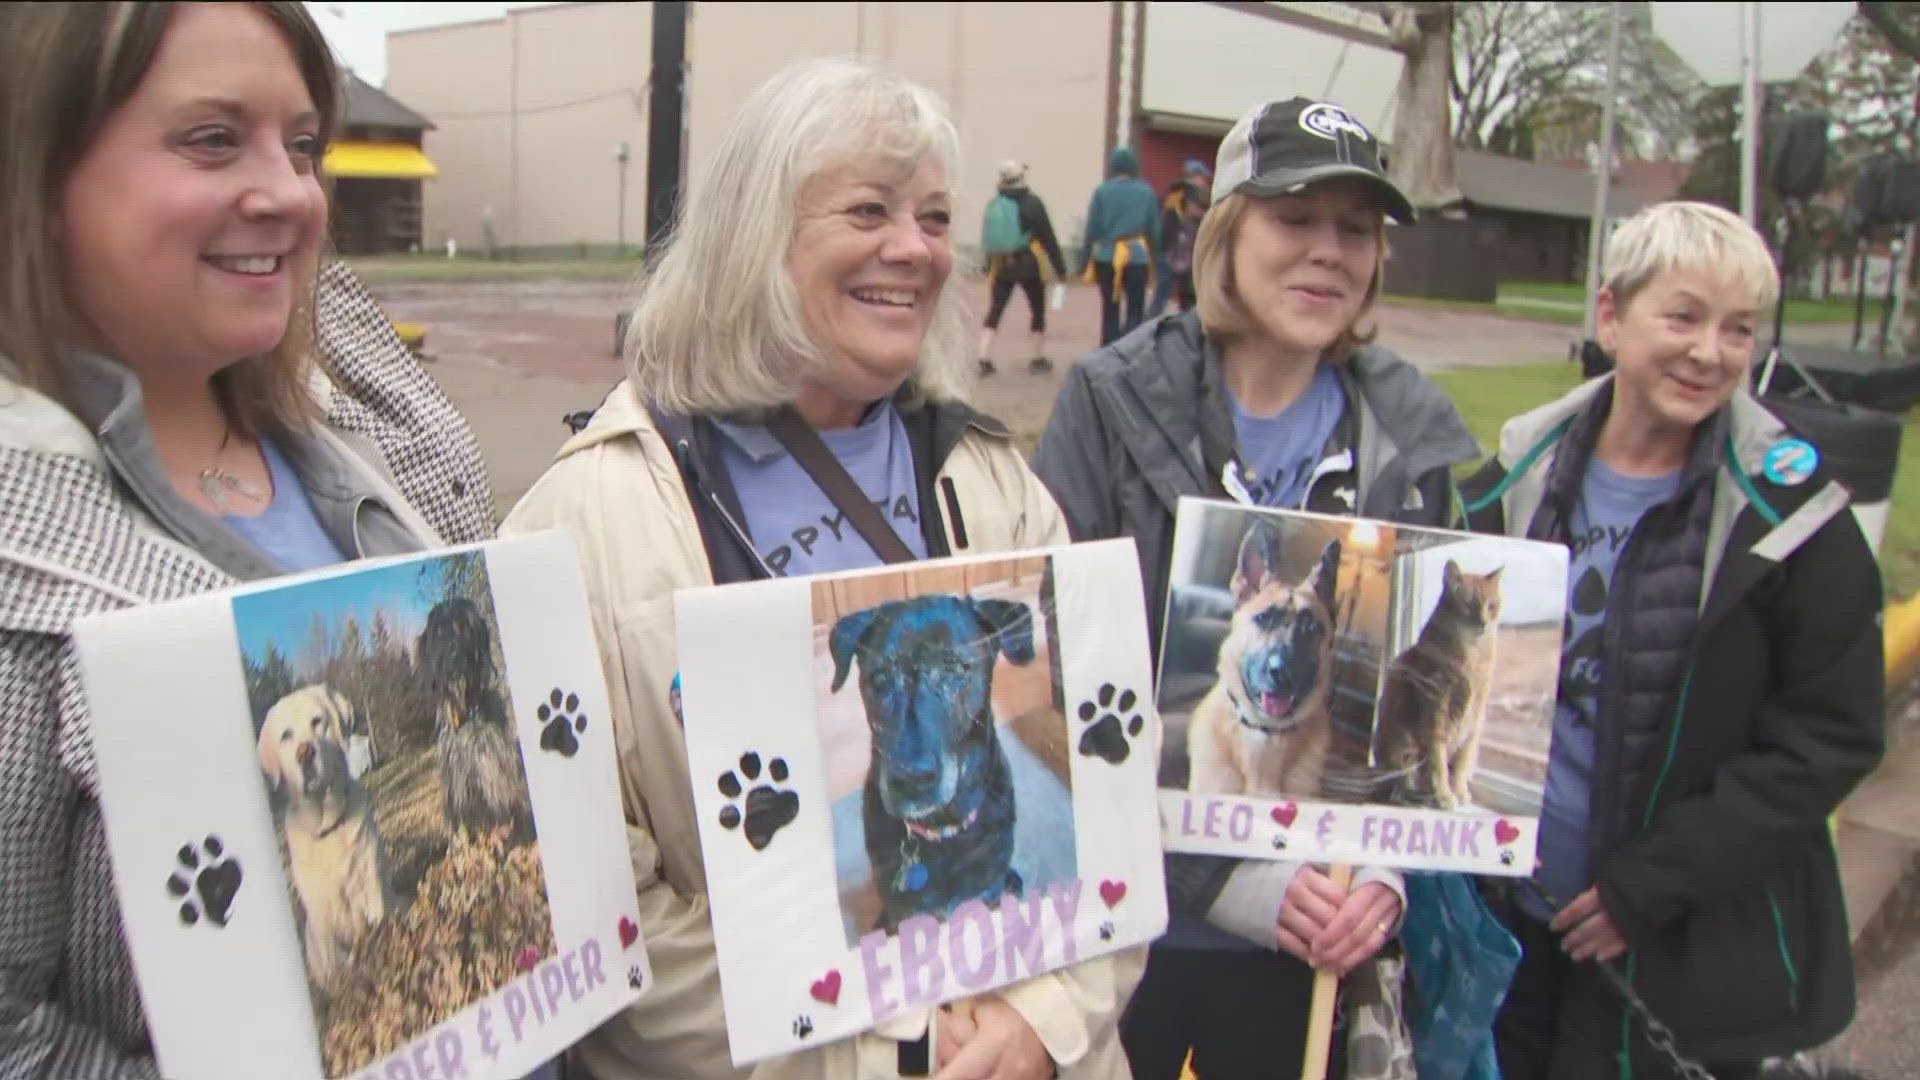 Hundreds of folks were out on Saturday to raise money for the Animal Humane Society.